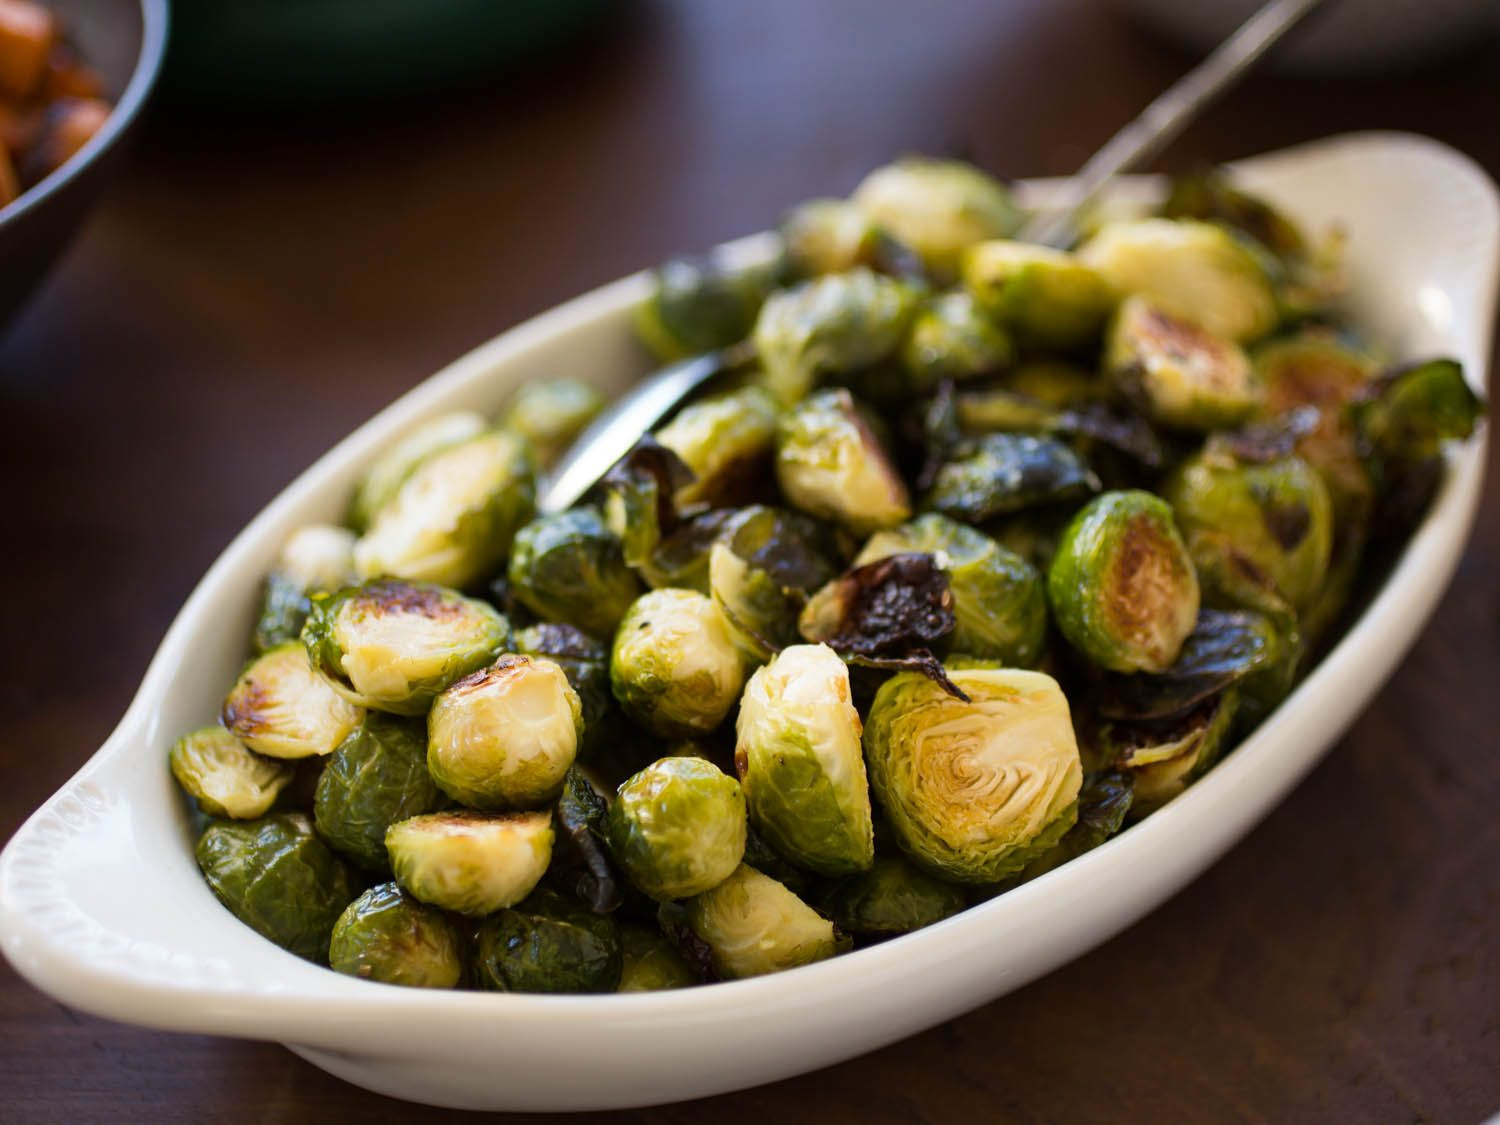 Brussels Sprouts Thanksgiving Side Dishes
 Roasted Brussels Sprouts and Shallots With Balsamic